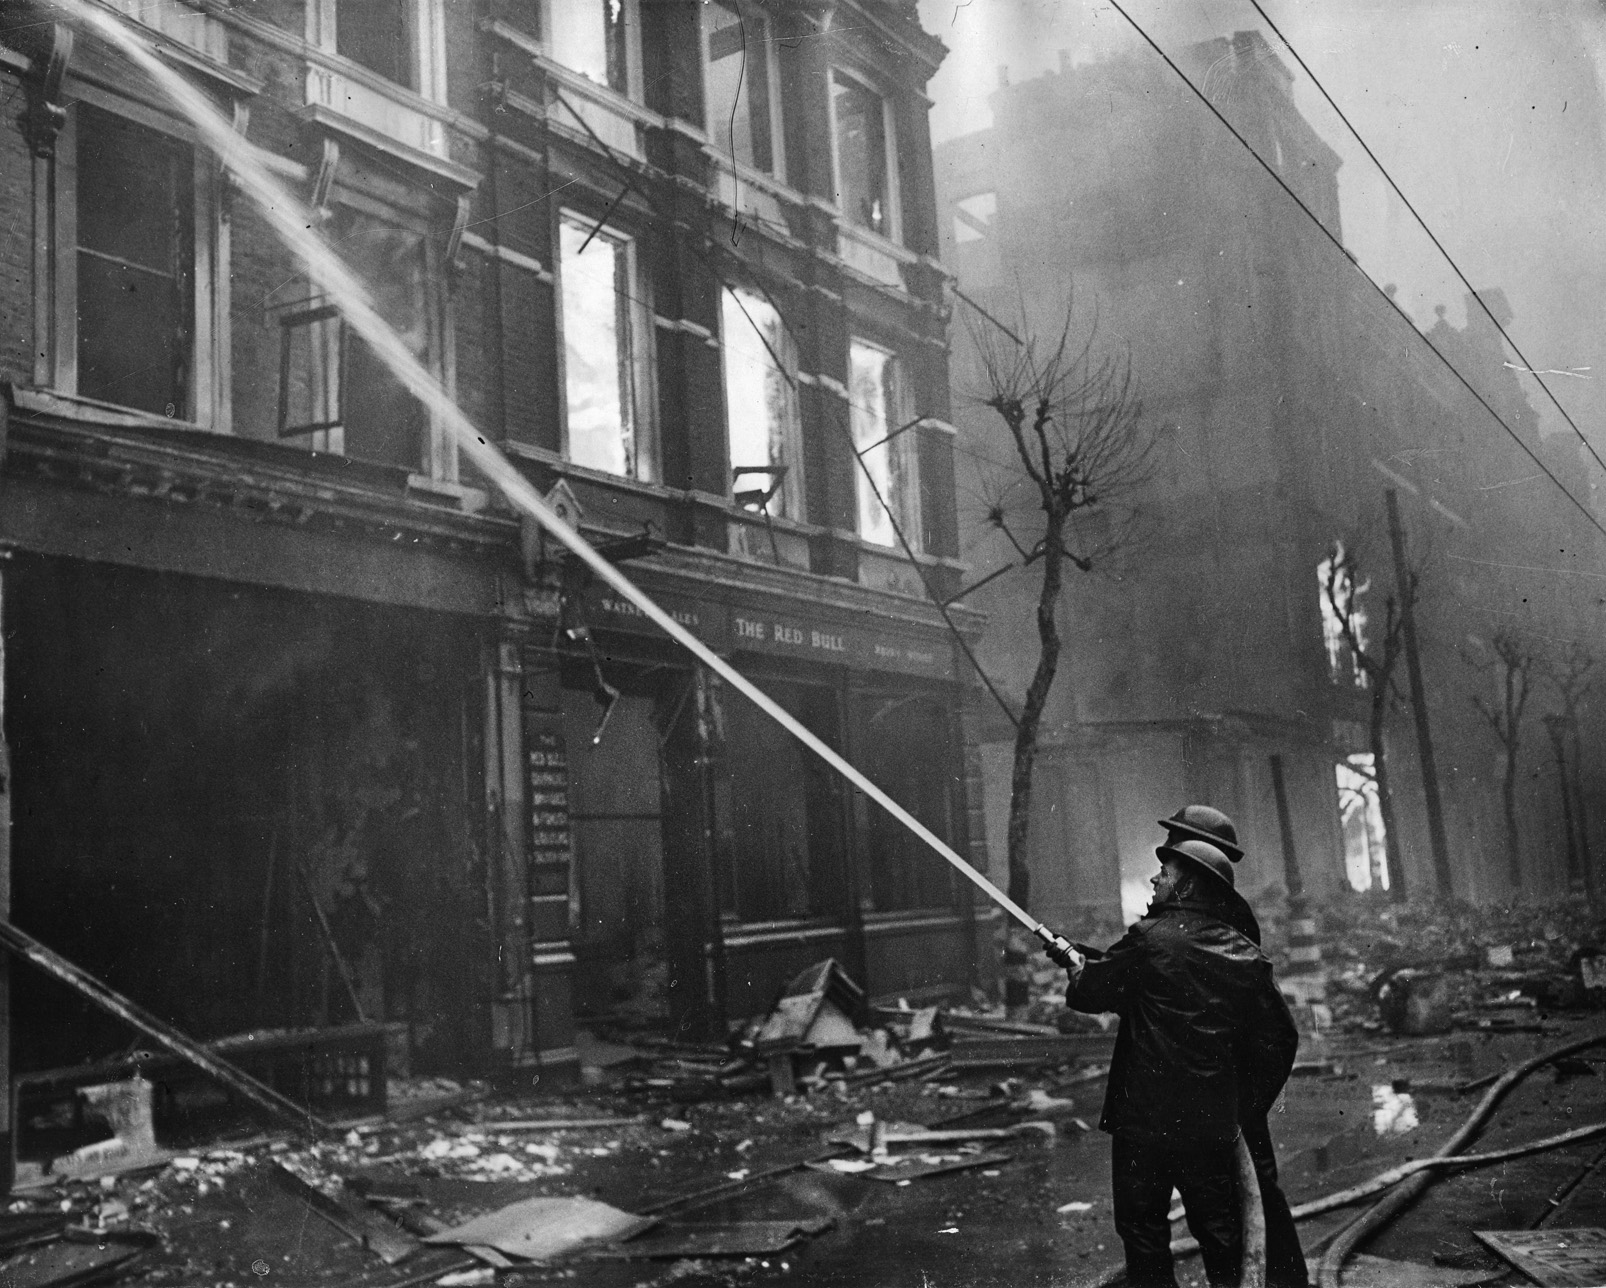 Firemen battle flames in London’s hard-hit East End during a German air raid during “the Blitz,” which lasted from September 7, 1940, to May 11, 1941, when Hitler decided to invade Russia instead of Britain. 